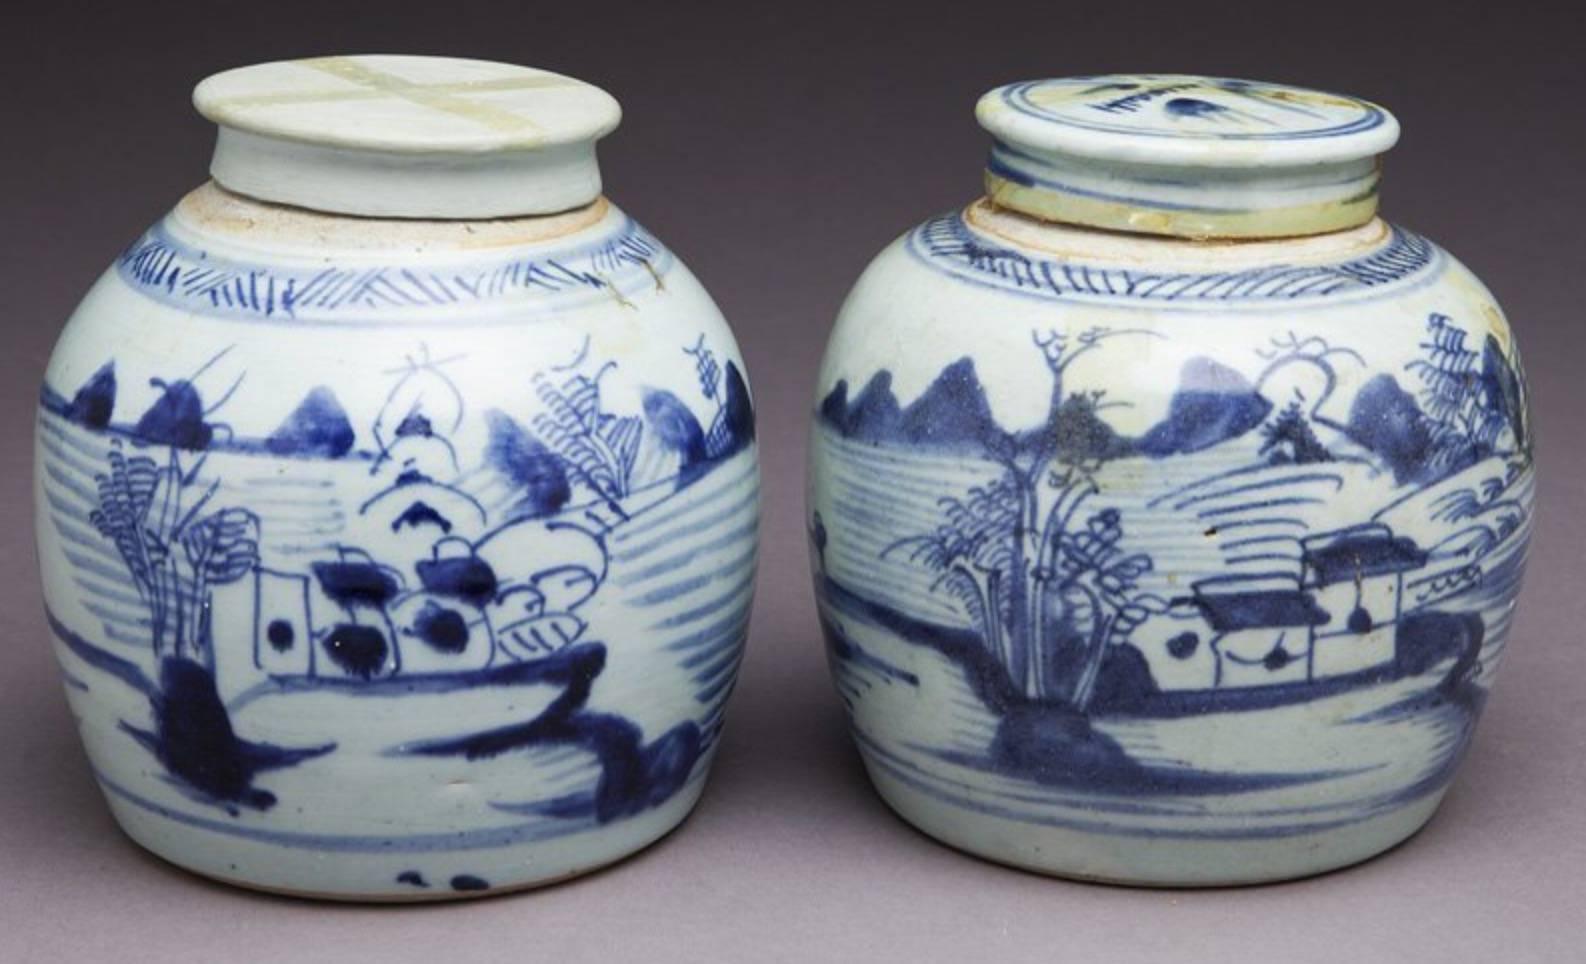 Four pieces. Antique Qing  blue/white canton export porcelain comprising: (Two) lidded jars; (one) pitcher; (one) handled dish. 

Pitcher: 7.5 Inches High

circa 19th century.